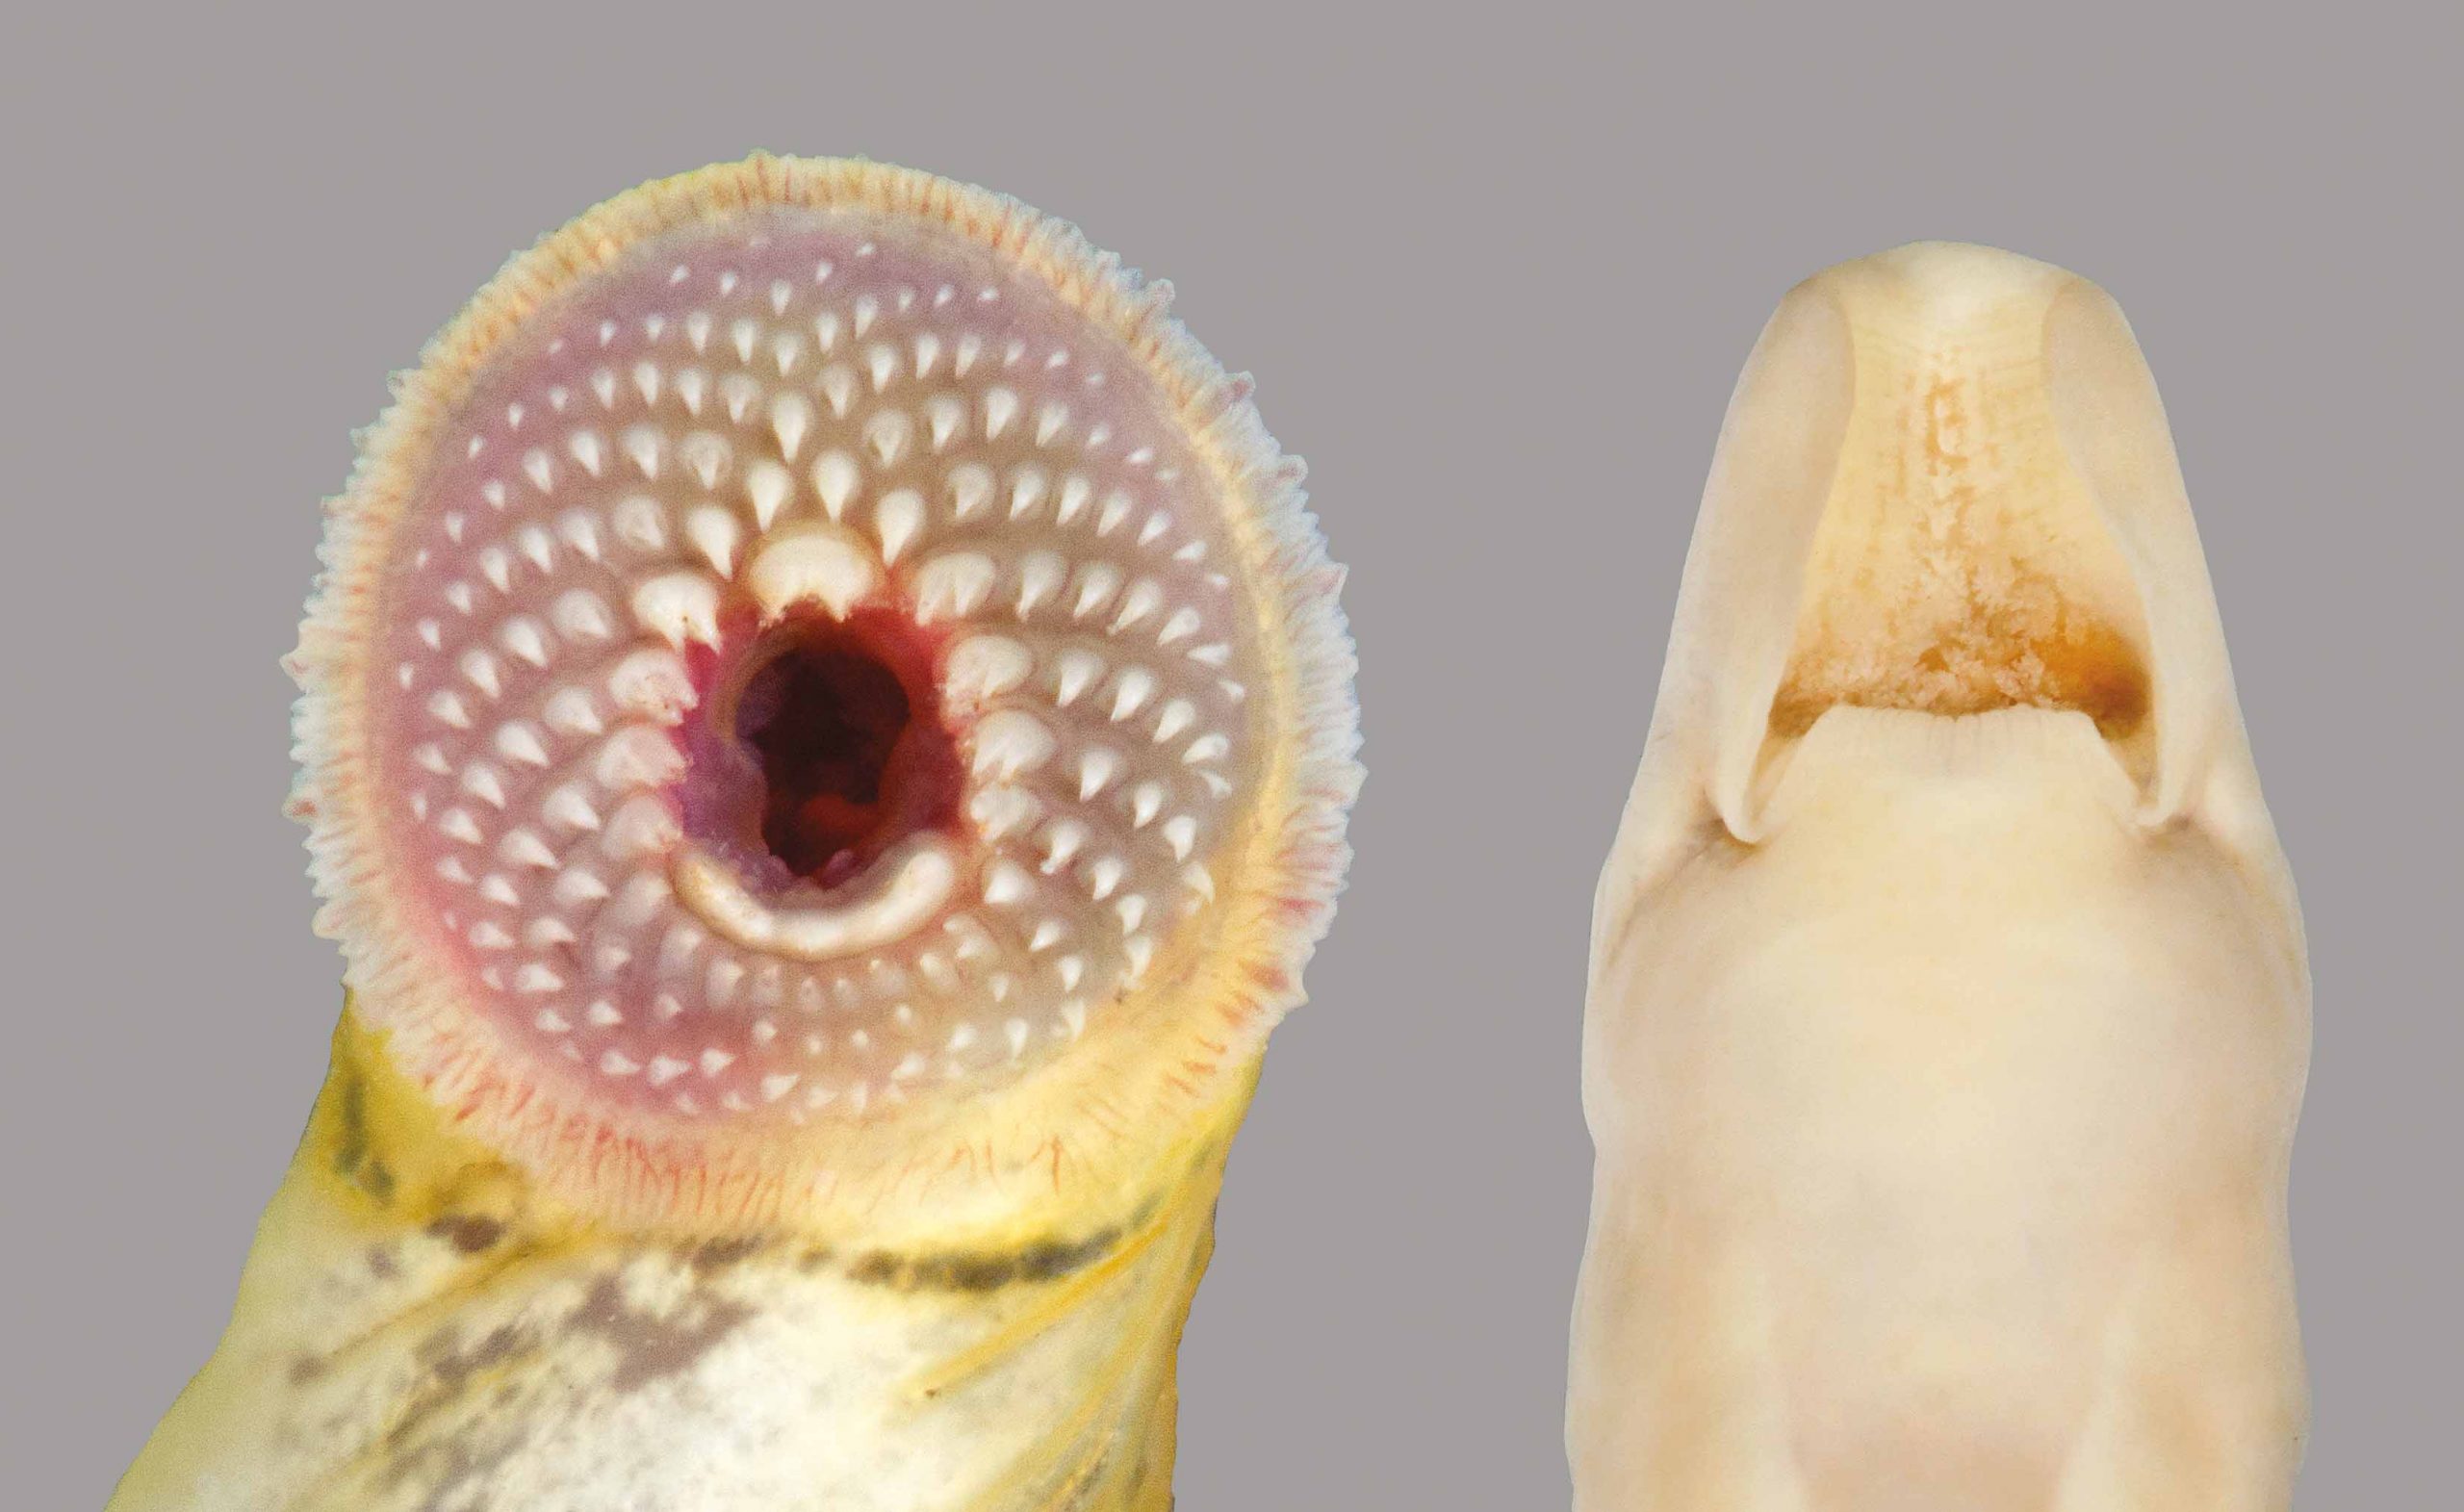 The mouth of a Southern Brook Lamprey